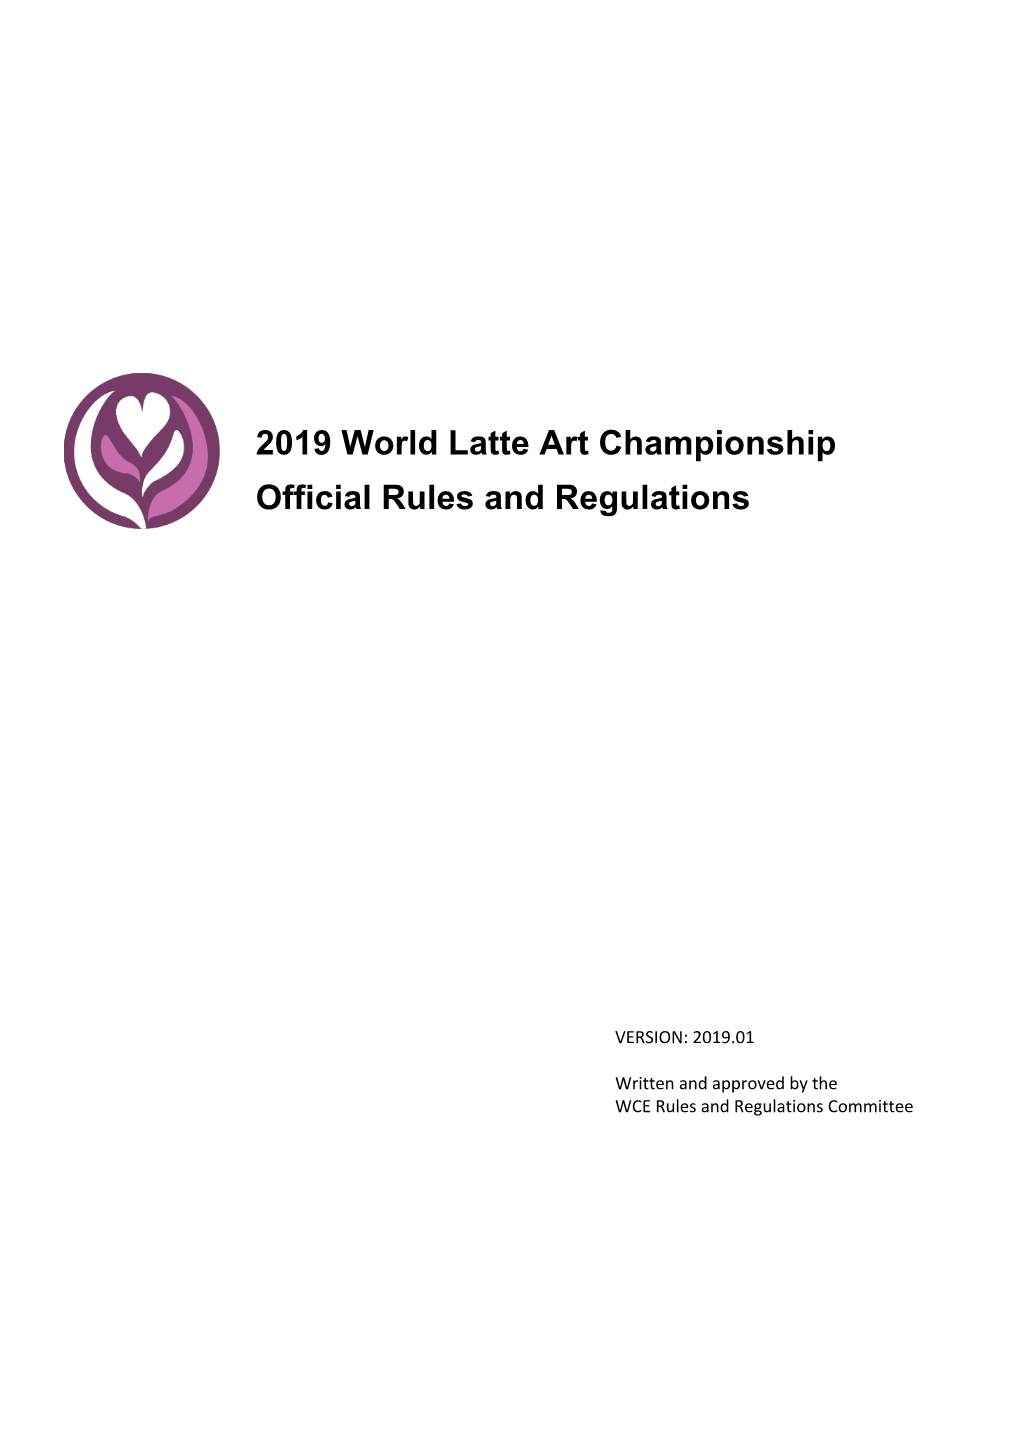 2019 World Latte Art Championship Official Rules and Regulations